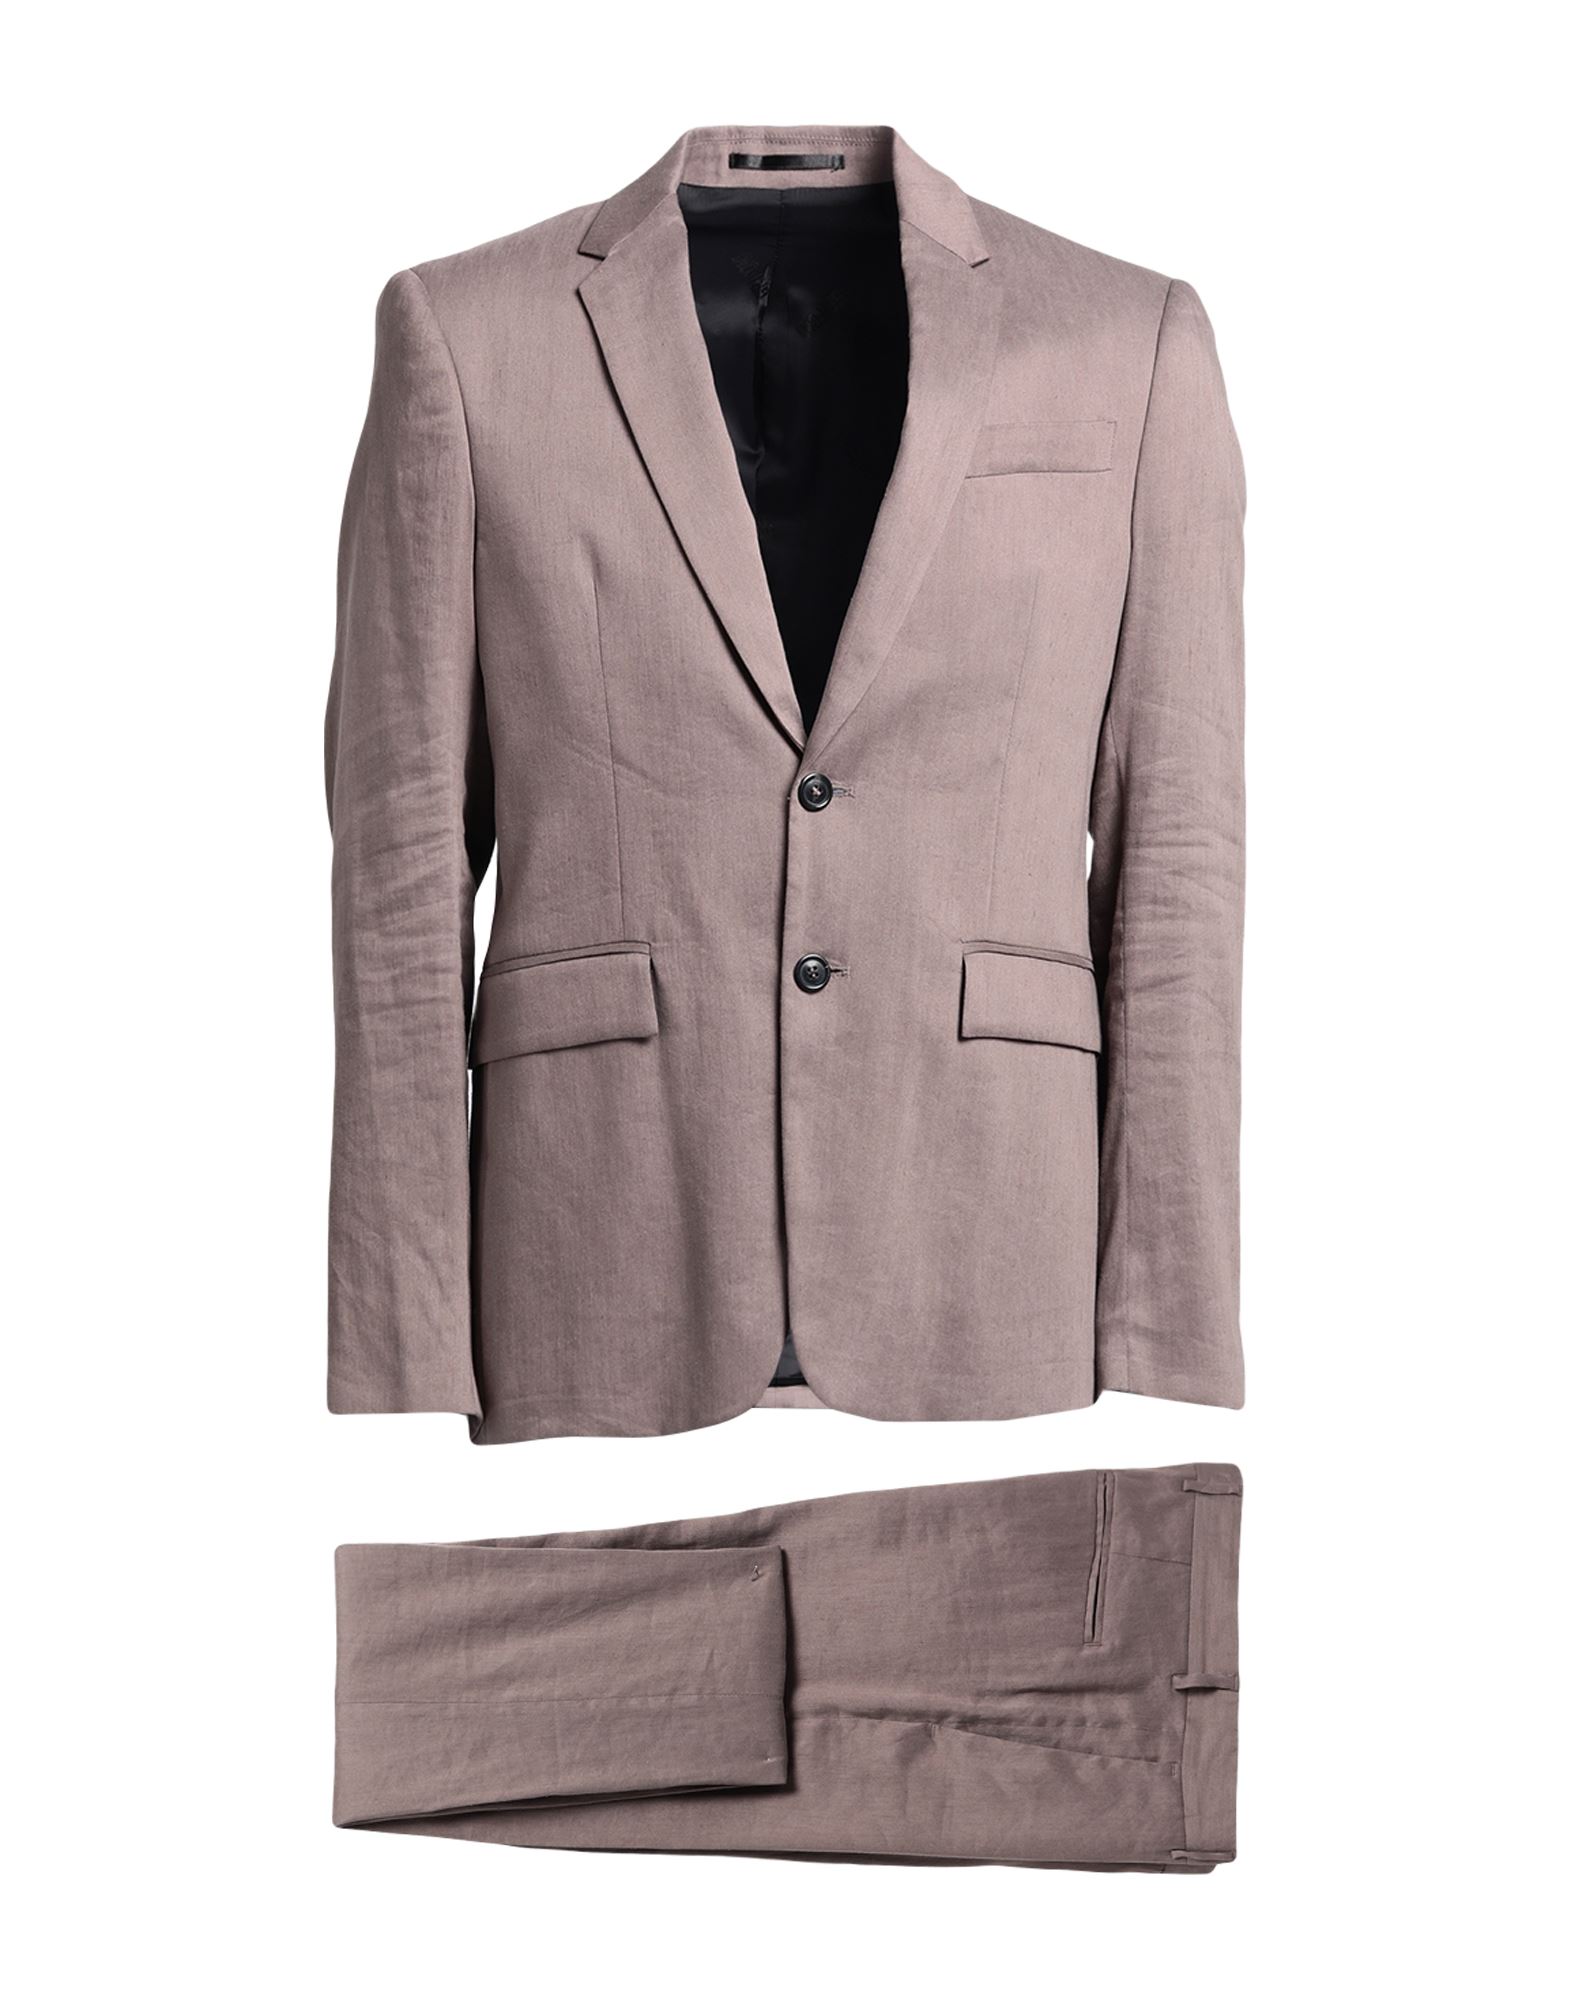 Mauro Grifoni Suits In Beige